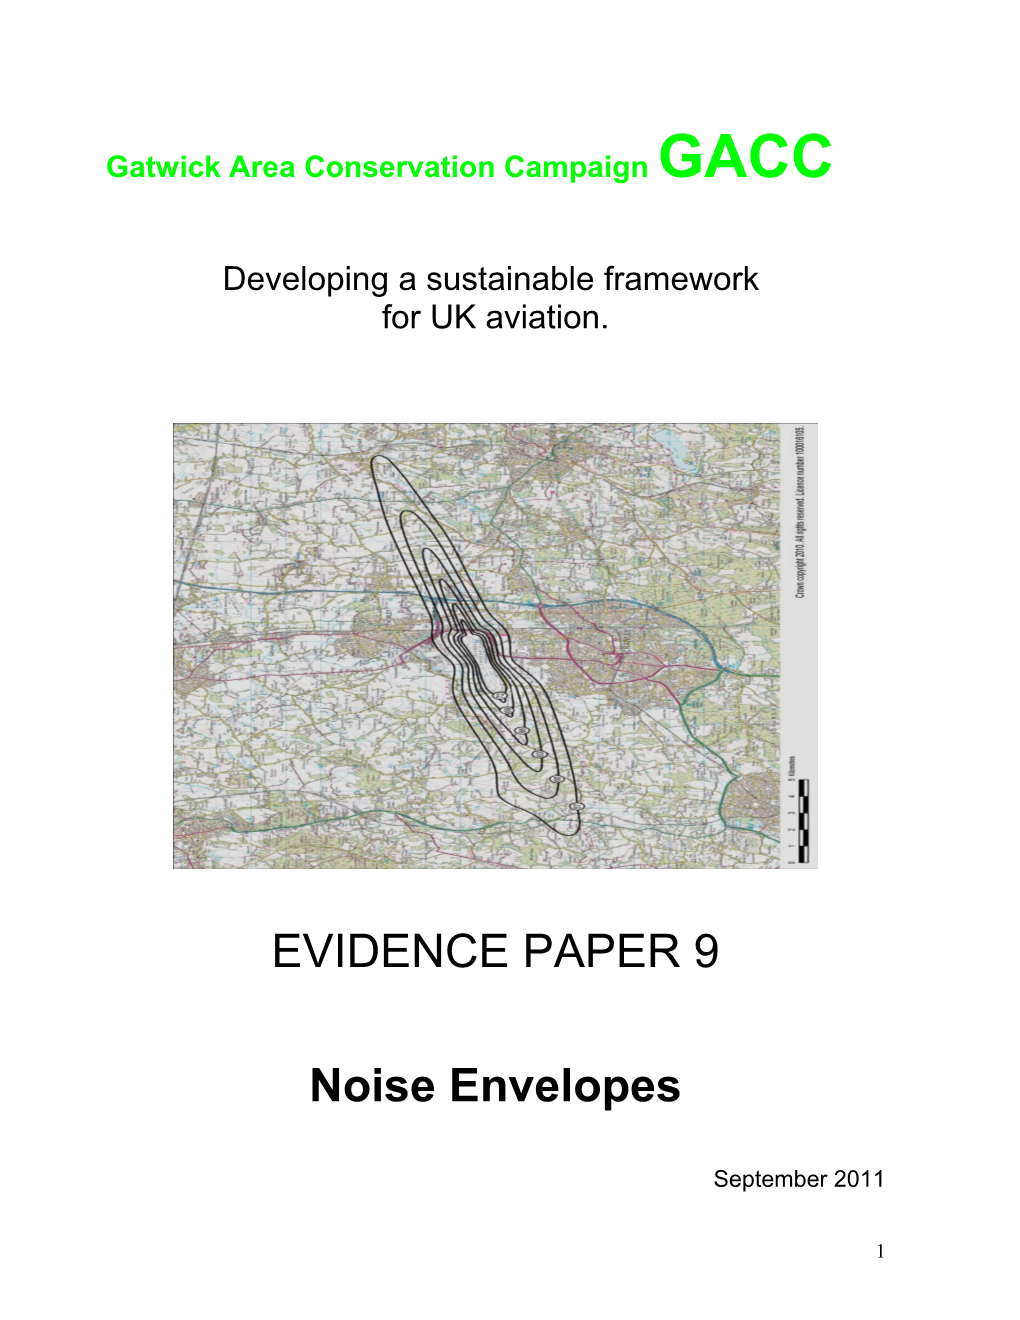 GACC Evidence Paper